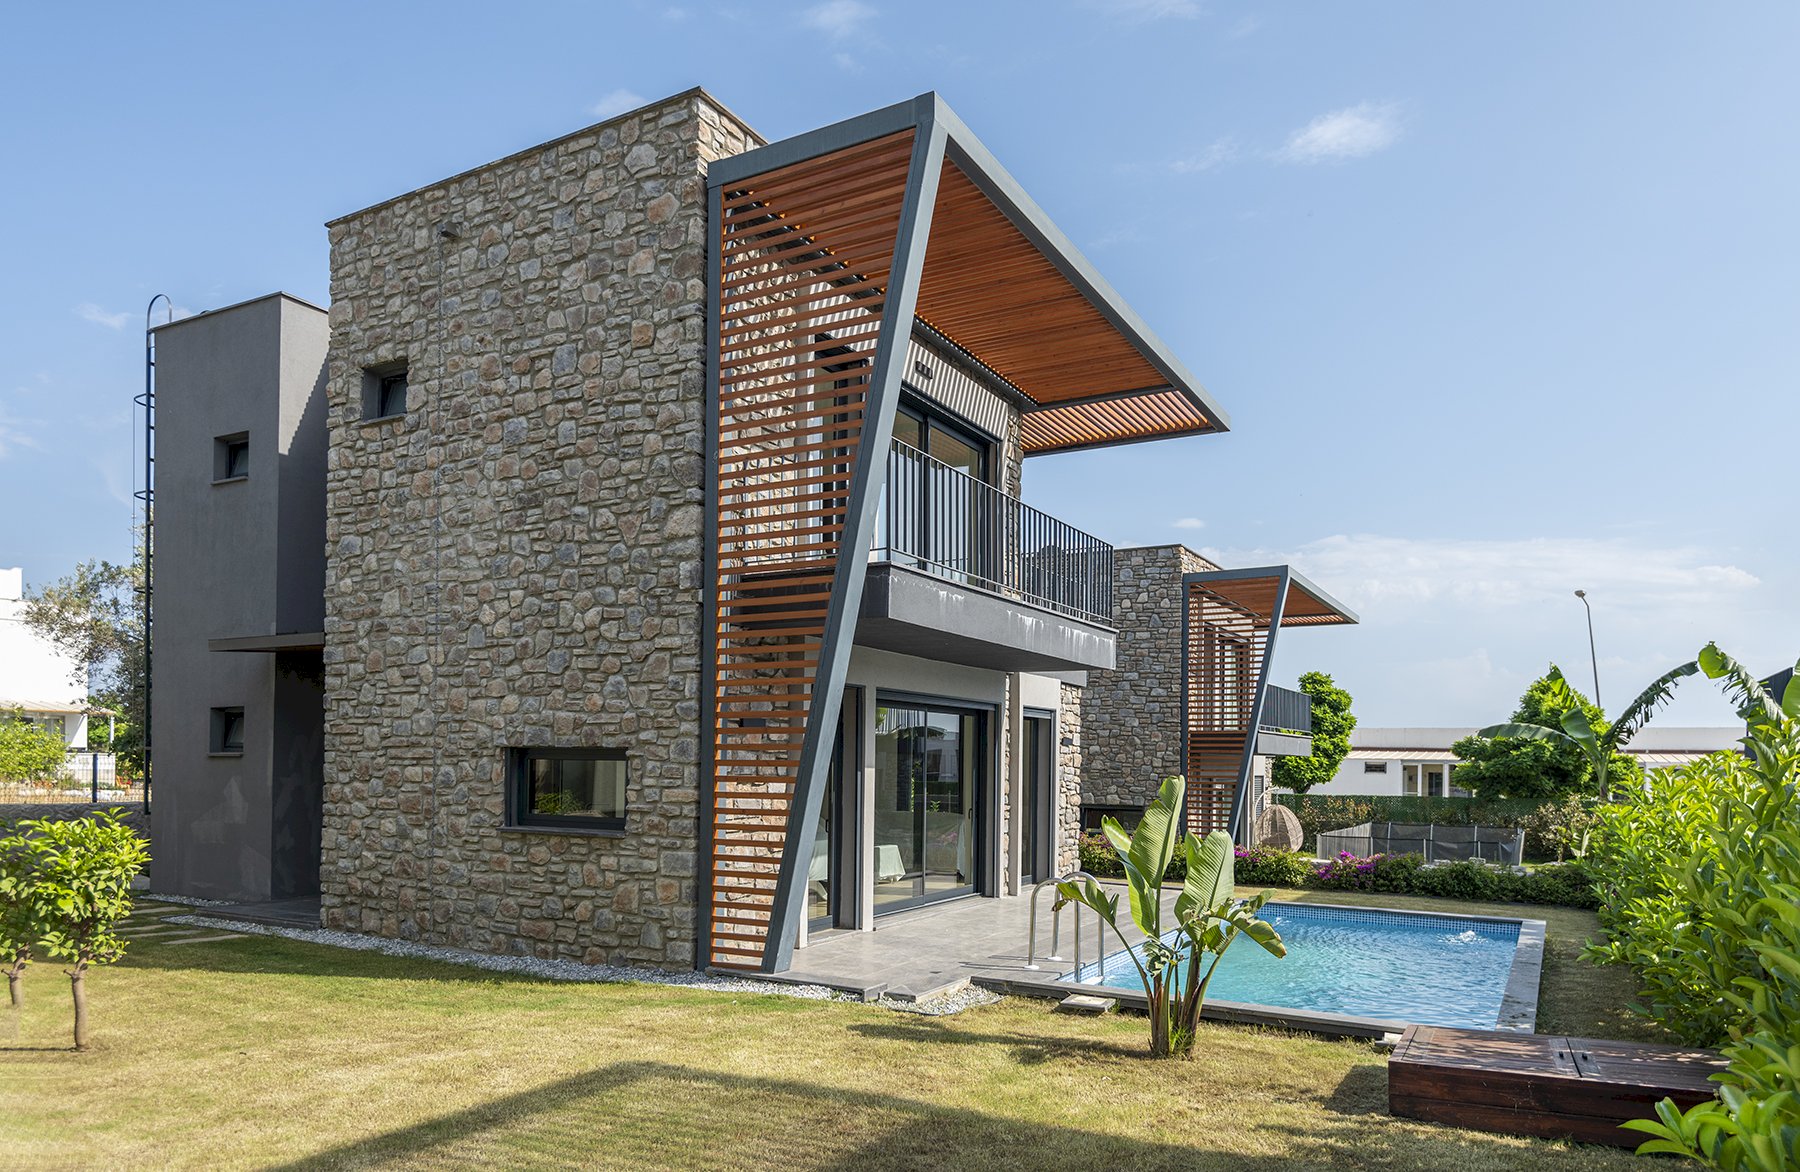 Villa with stone walls and wood soffits